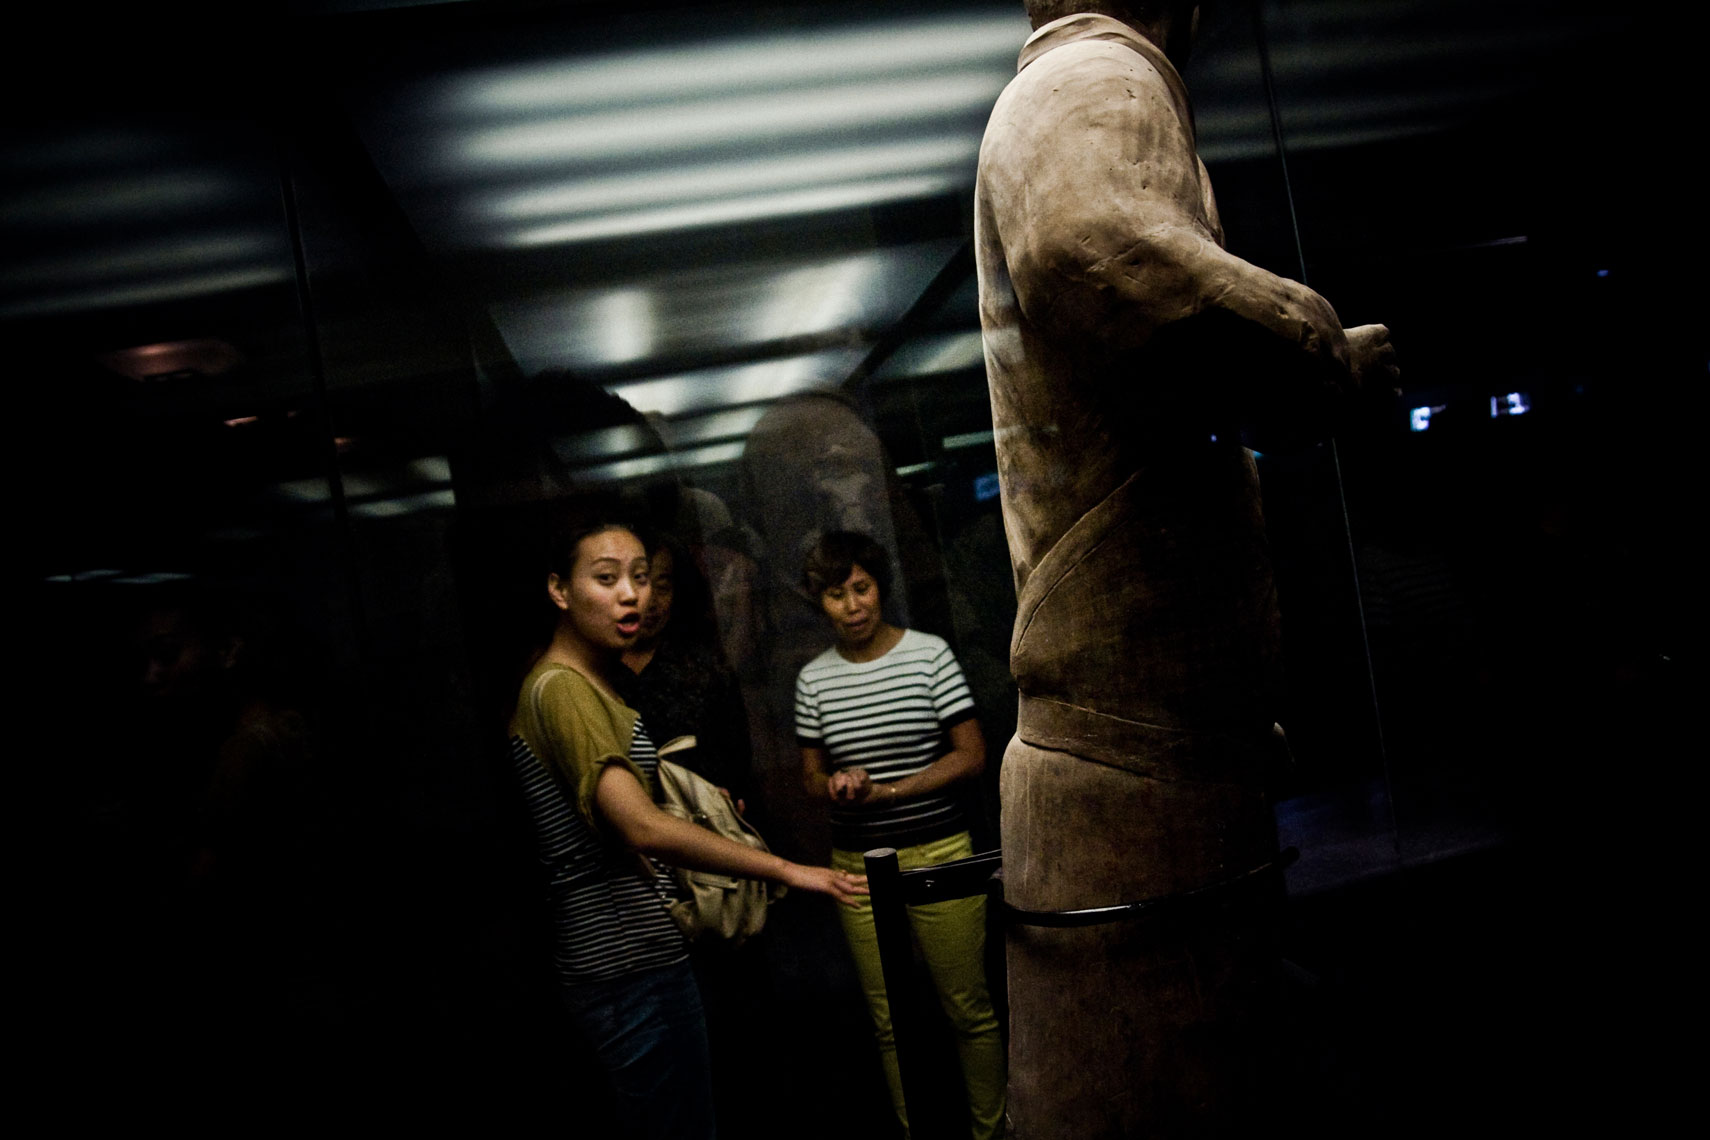 CHINA. Xi'an, Shaanxi Province, September 2012. Chinese tourists visit the Terracotta Army site.